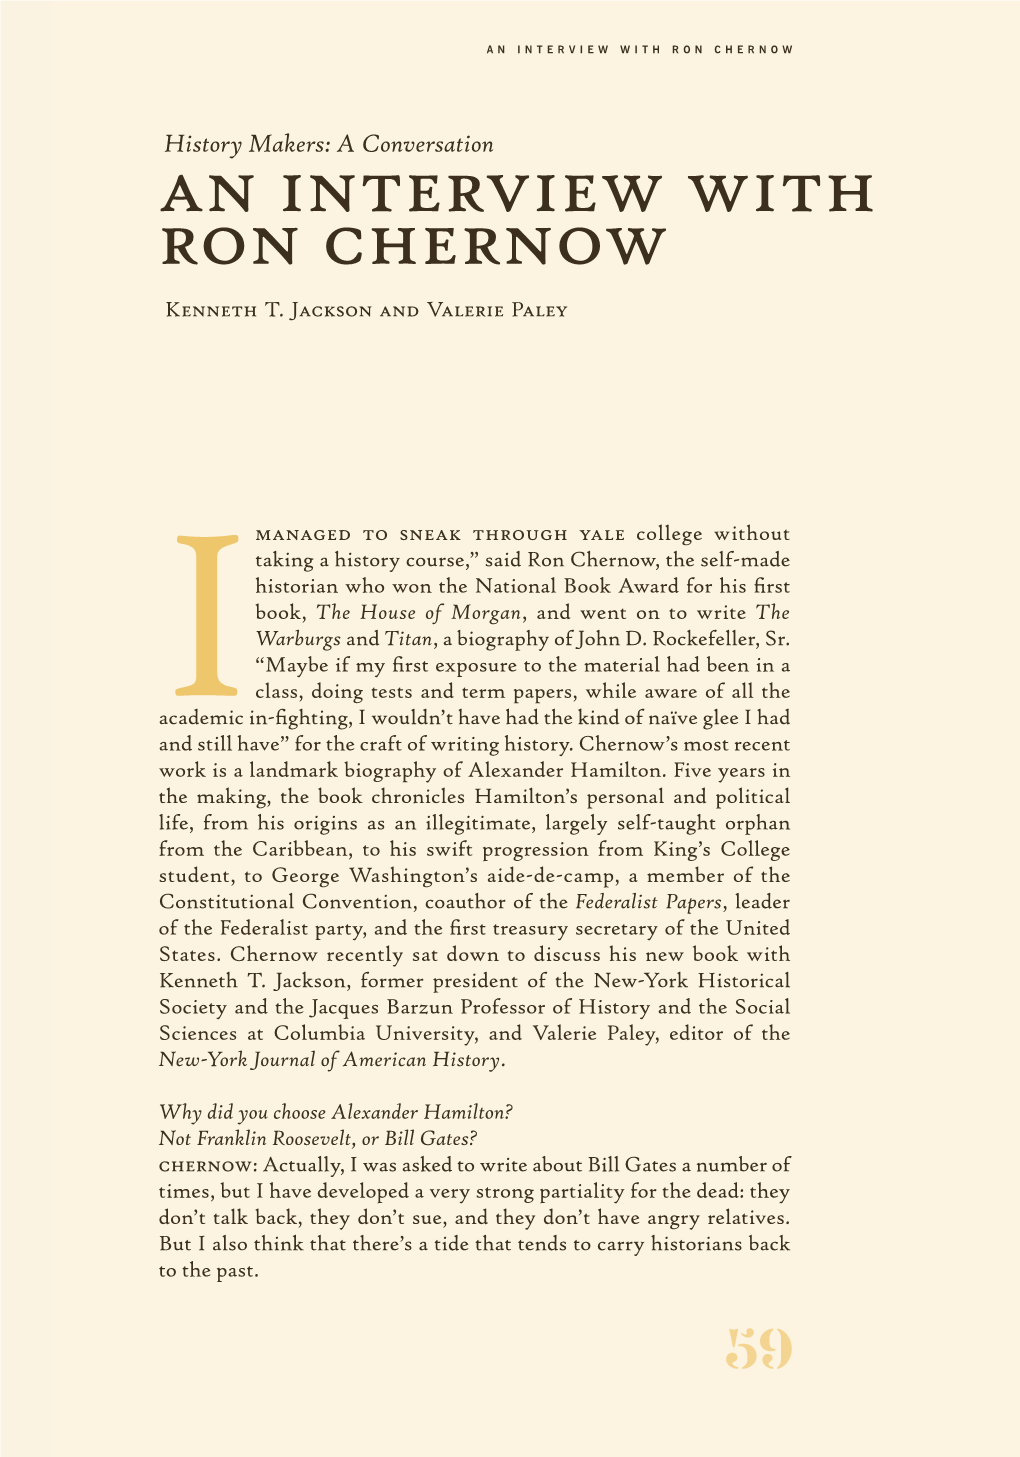 AN INTERVIEW with RON CHERNOW Anhistory Makers: Interview a Conversation with Ron Chernow